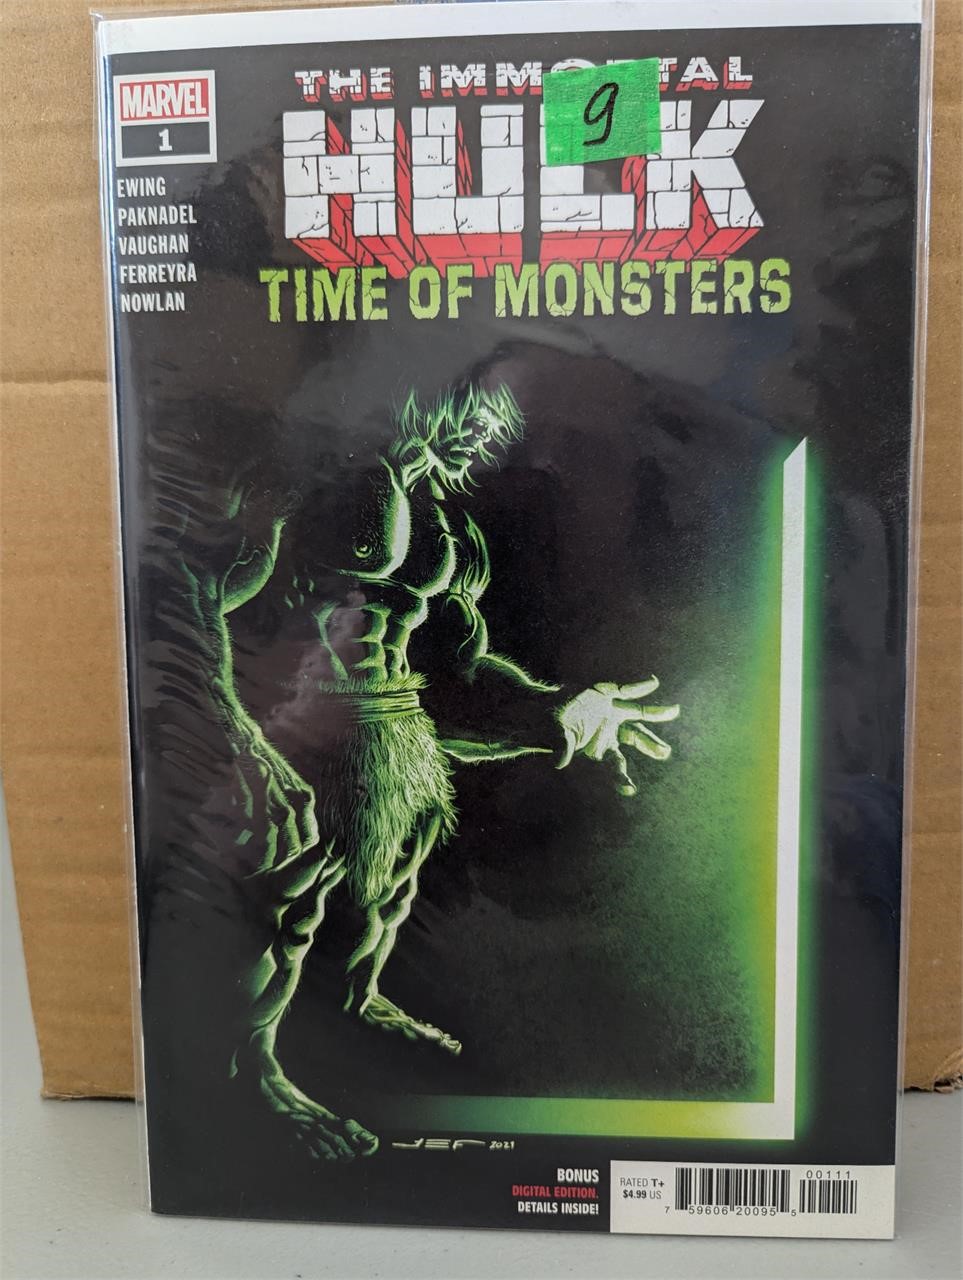 The Immortal Hulk -Time of Monsters